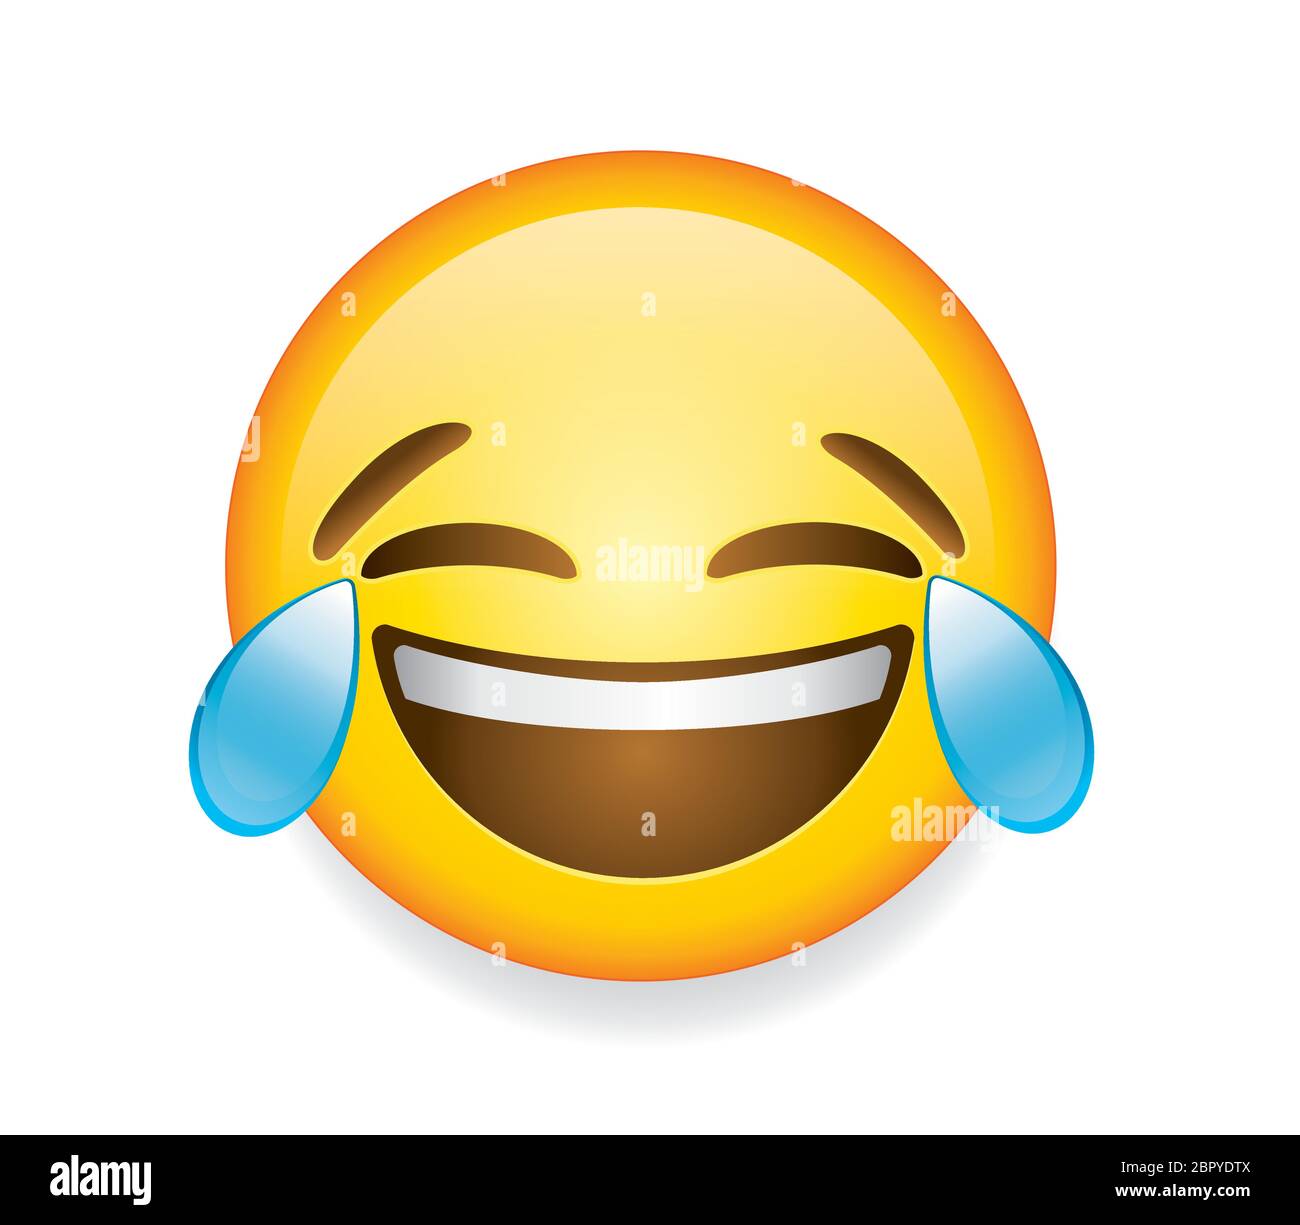 High quality emoticon on white background. Laughing emoji with tears ...